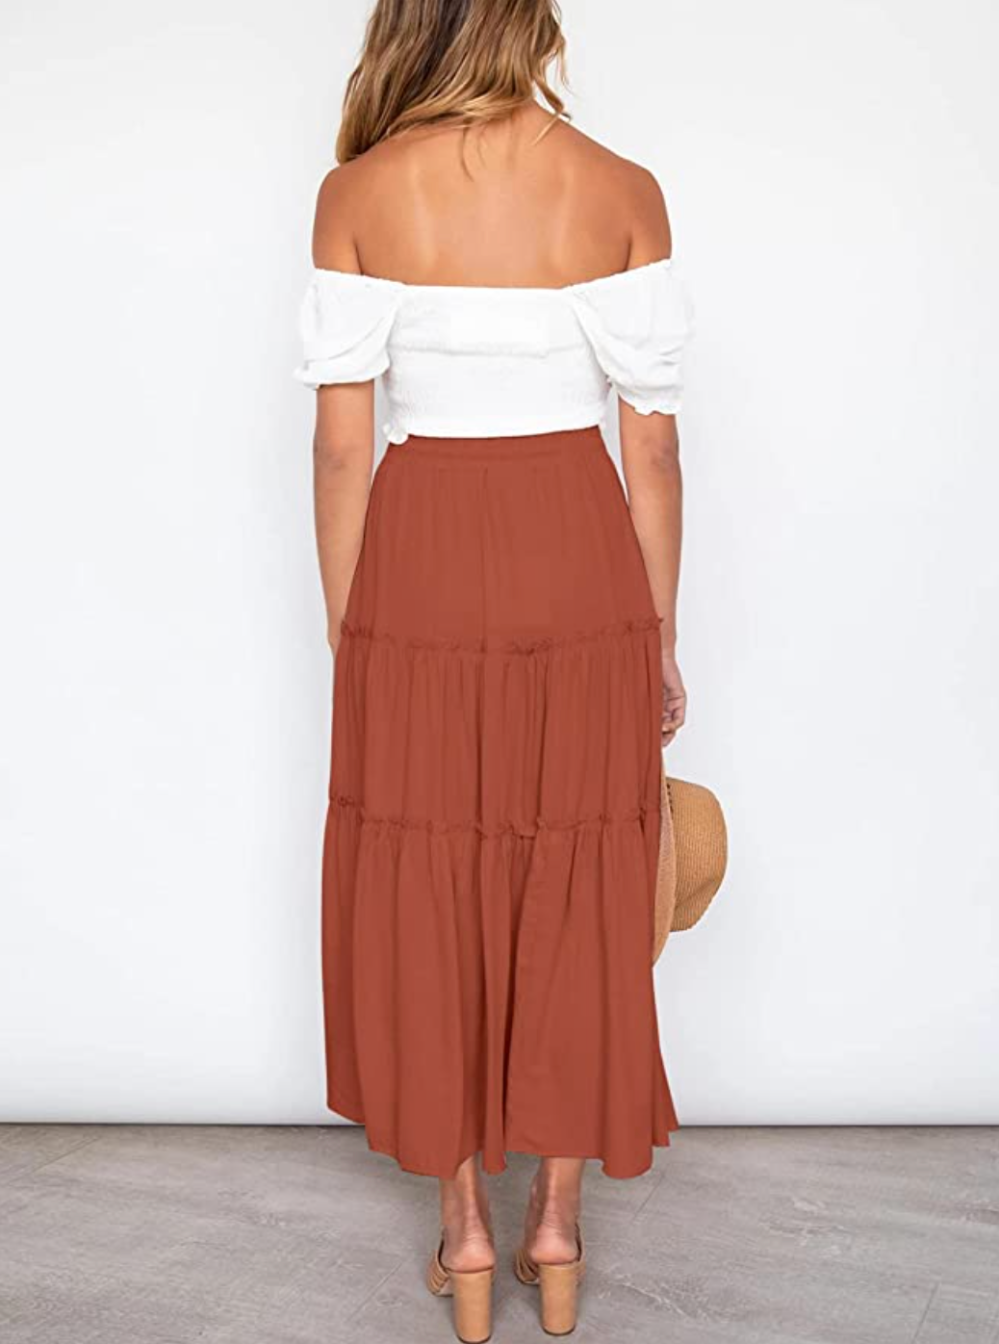 Maxi Skirts Are Trending for Spring — We Found the Best to Buy